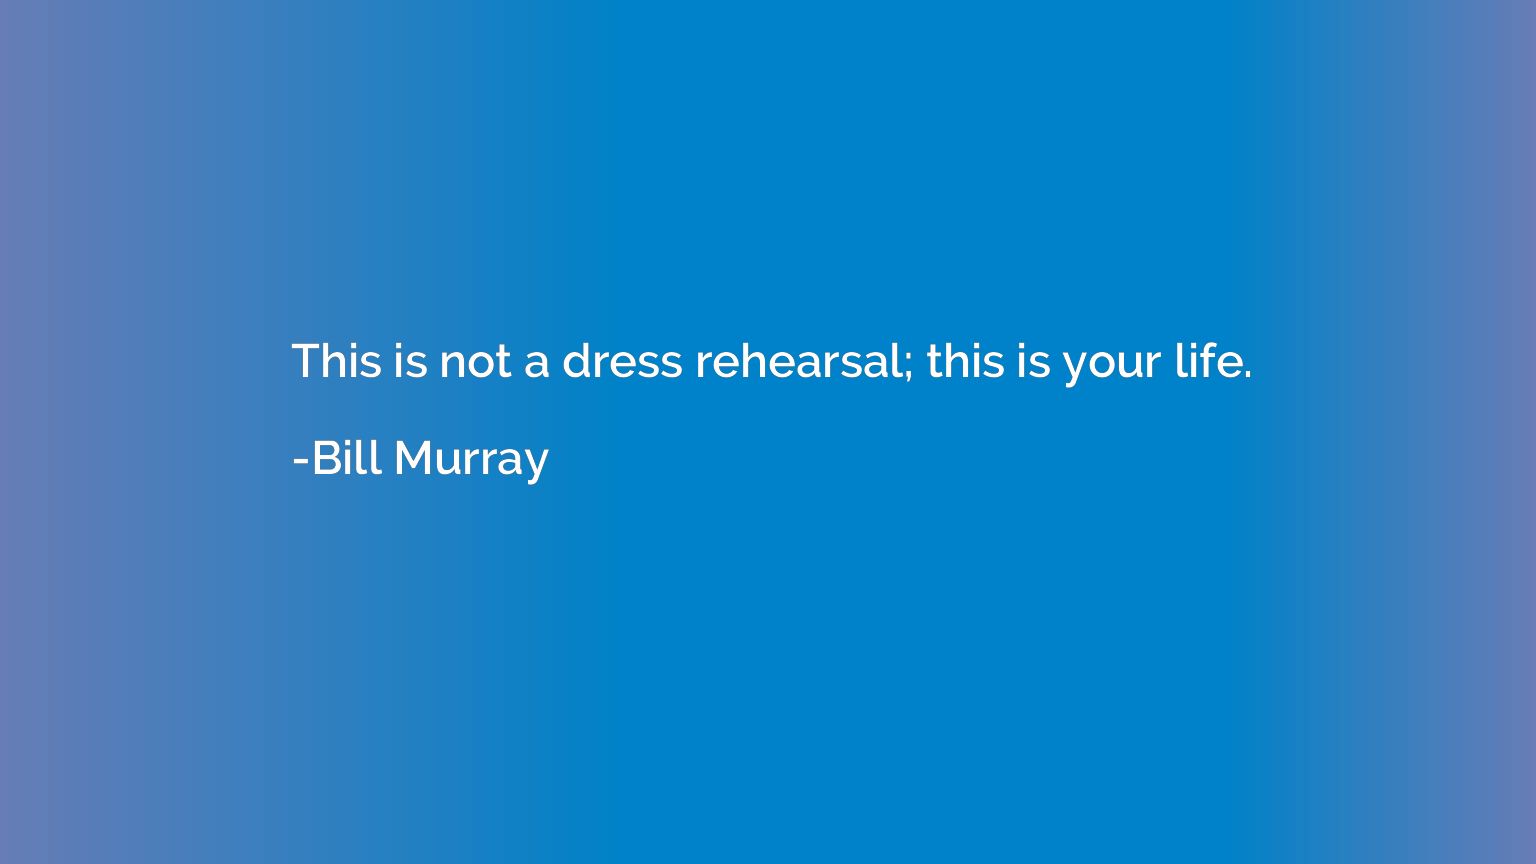 This is not a dress rehearsal; this is your life.